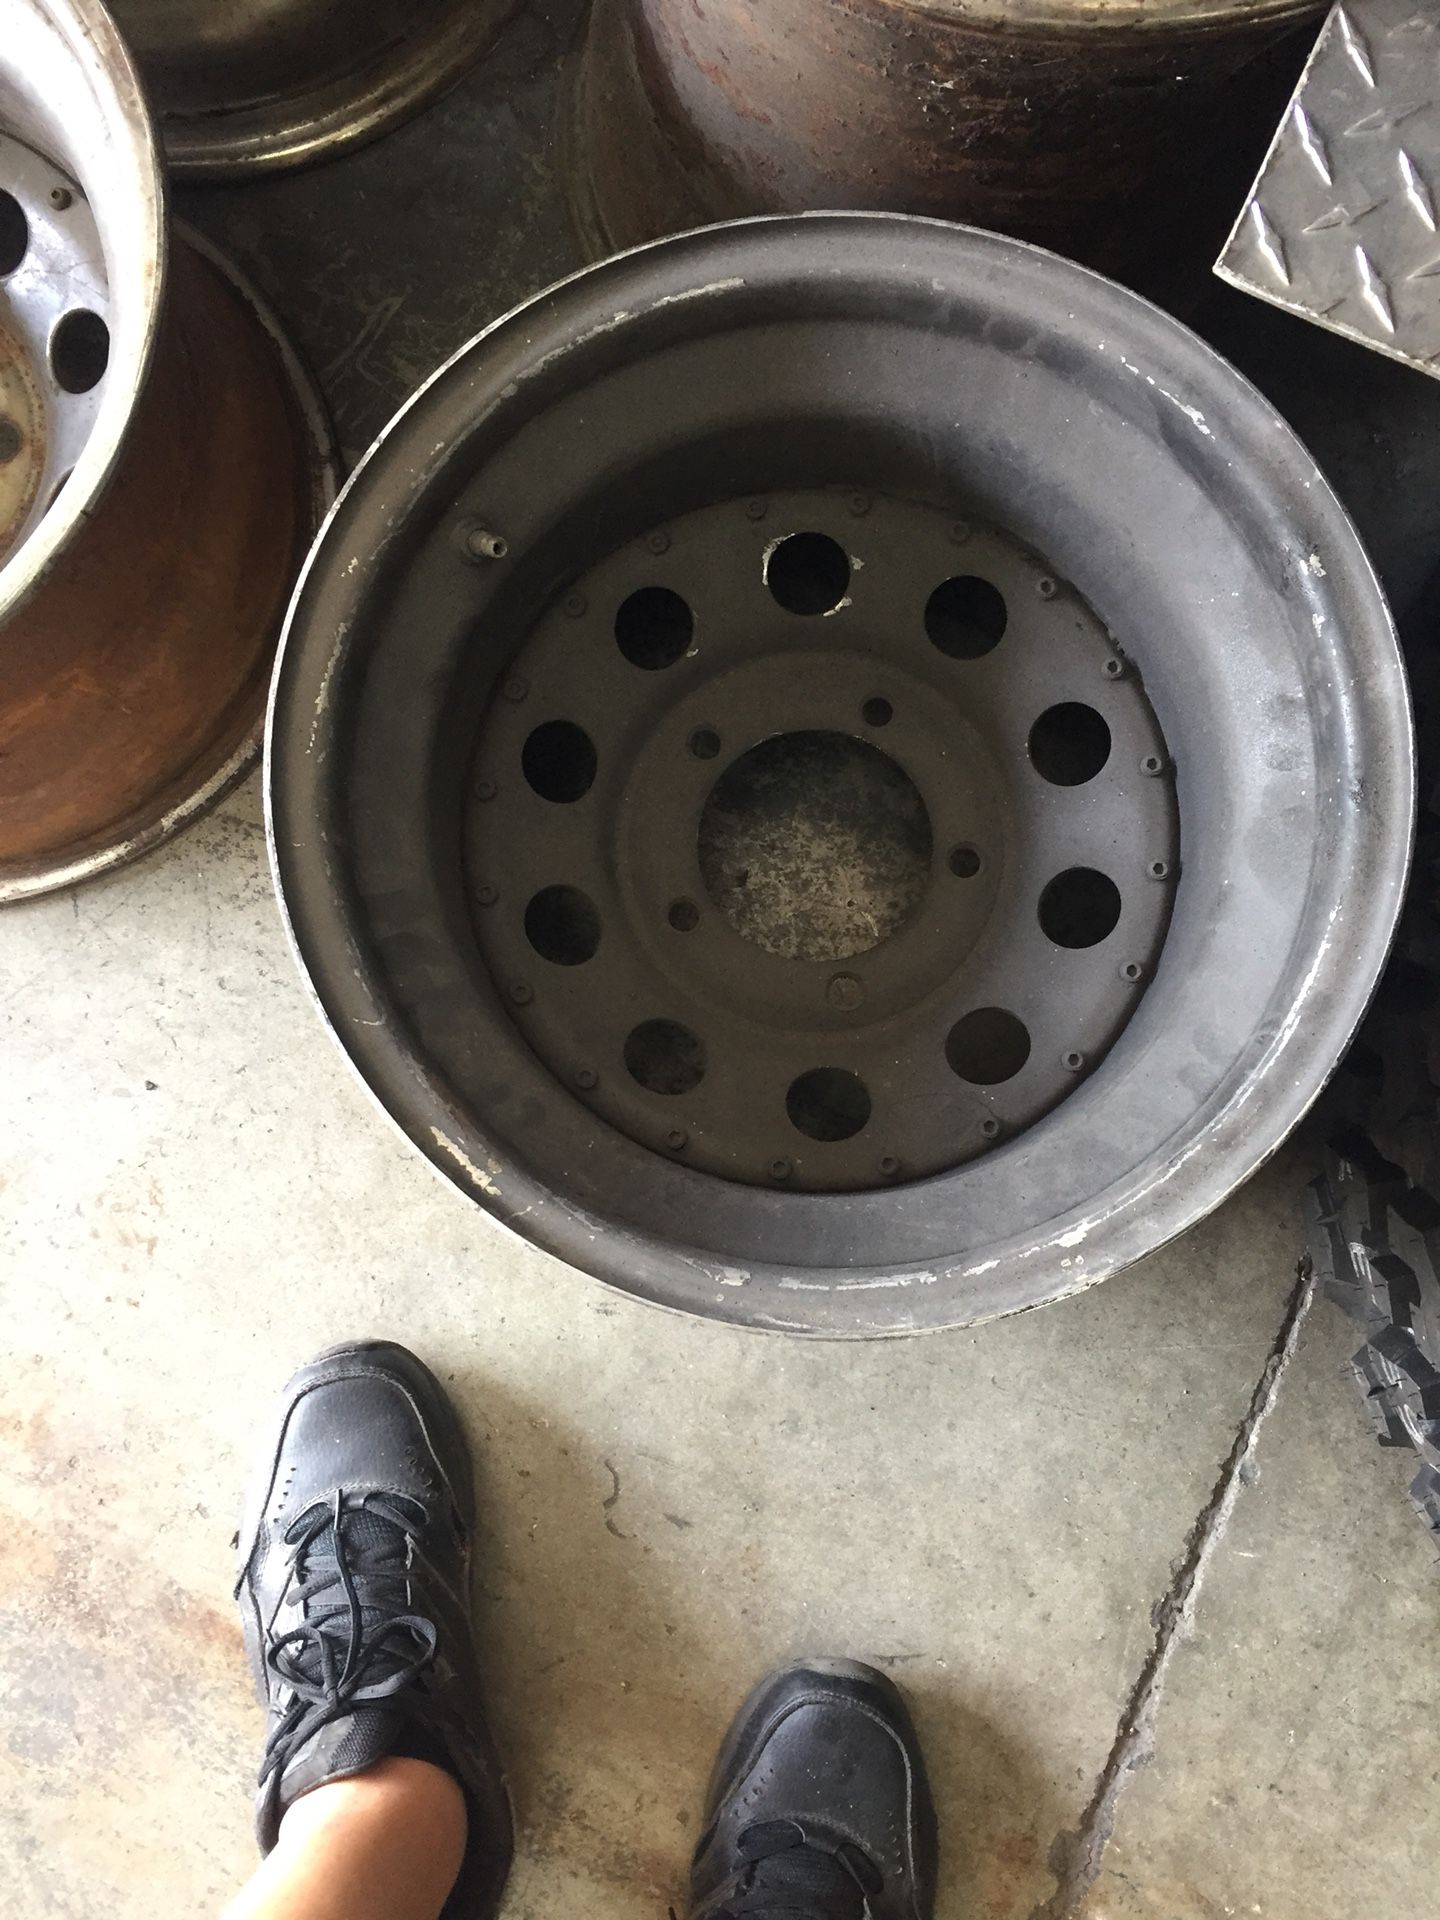 Jeep cj wheels 15 x12. Come and see them I have 3 sets